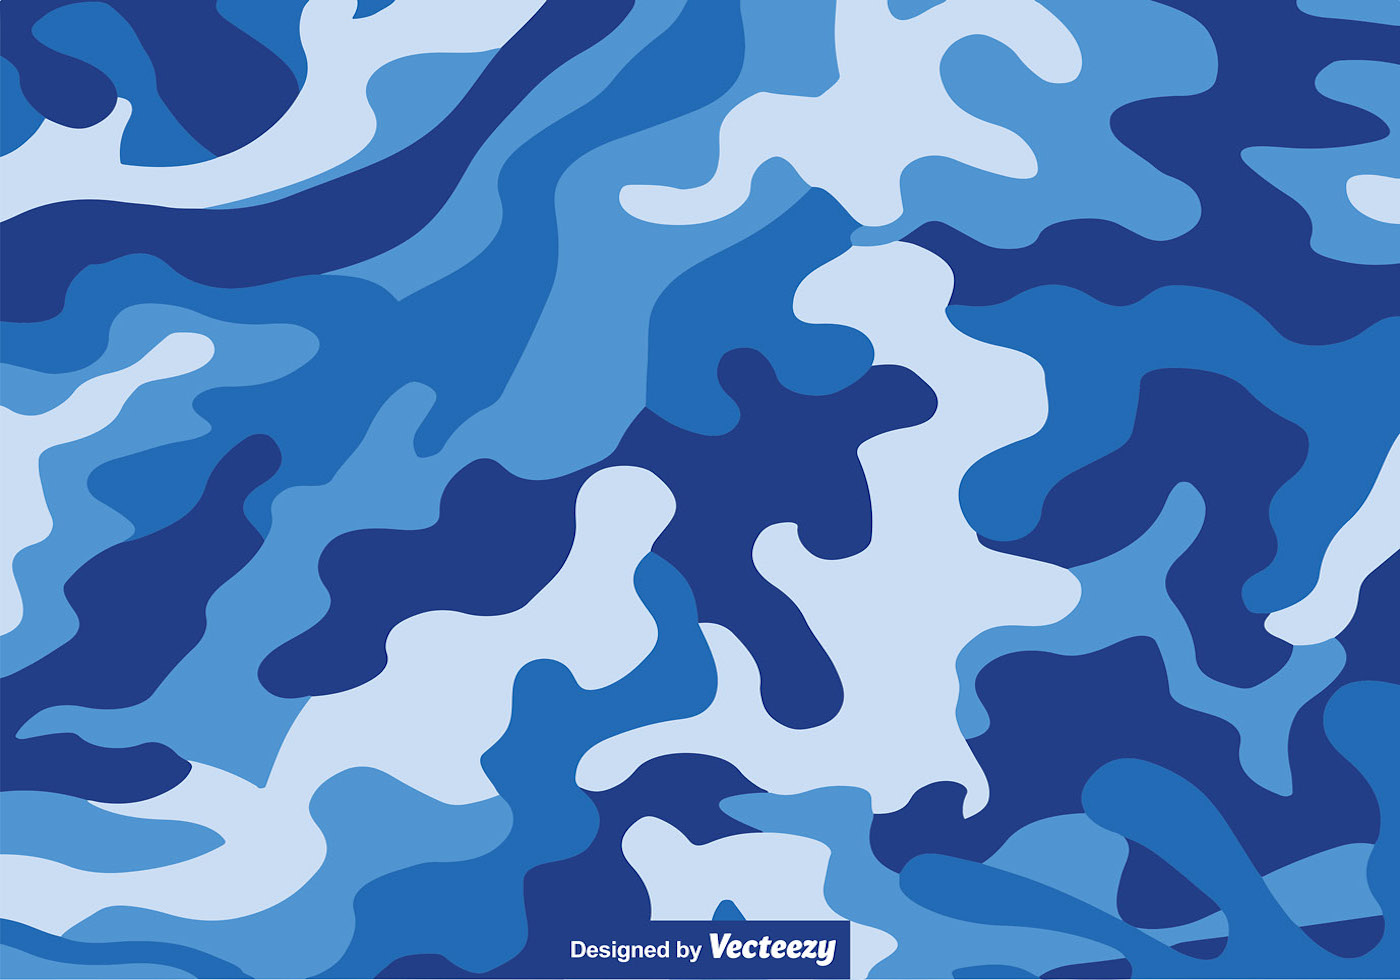 2. Camo Nails: How to Create a Blue Camouflage Design - wide 6